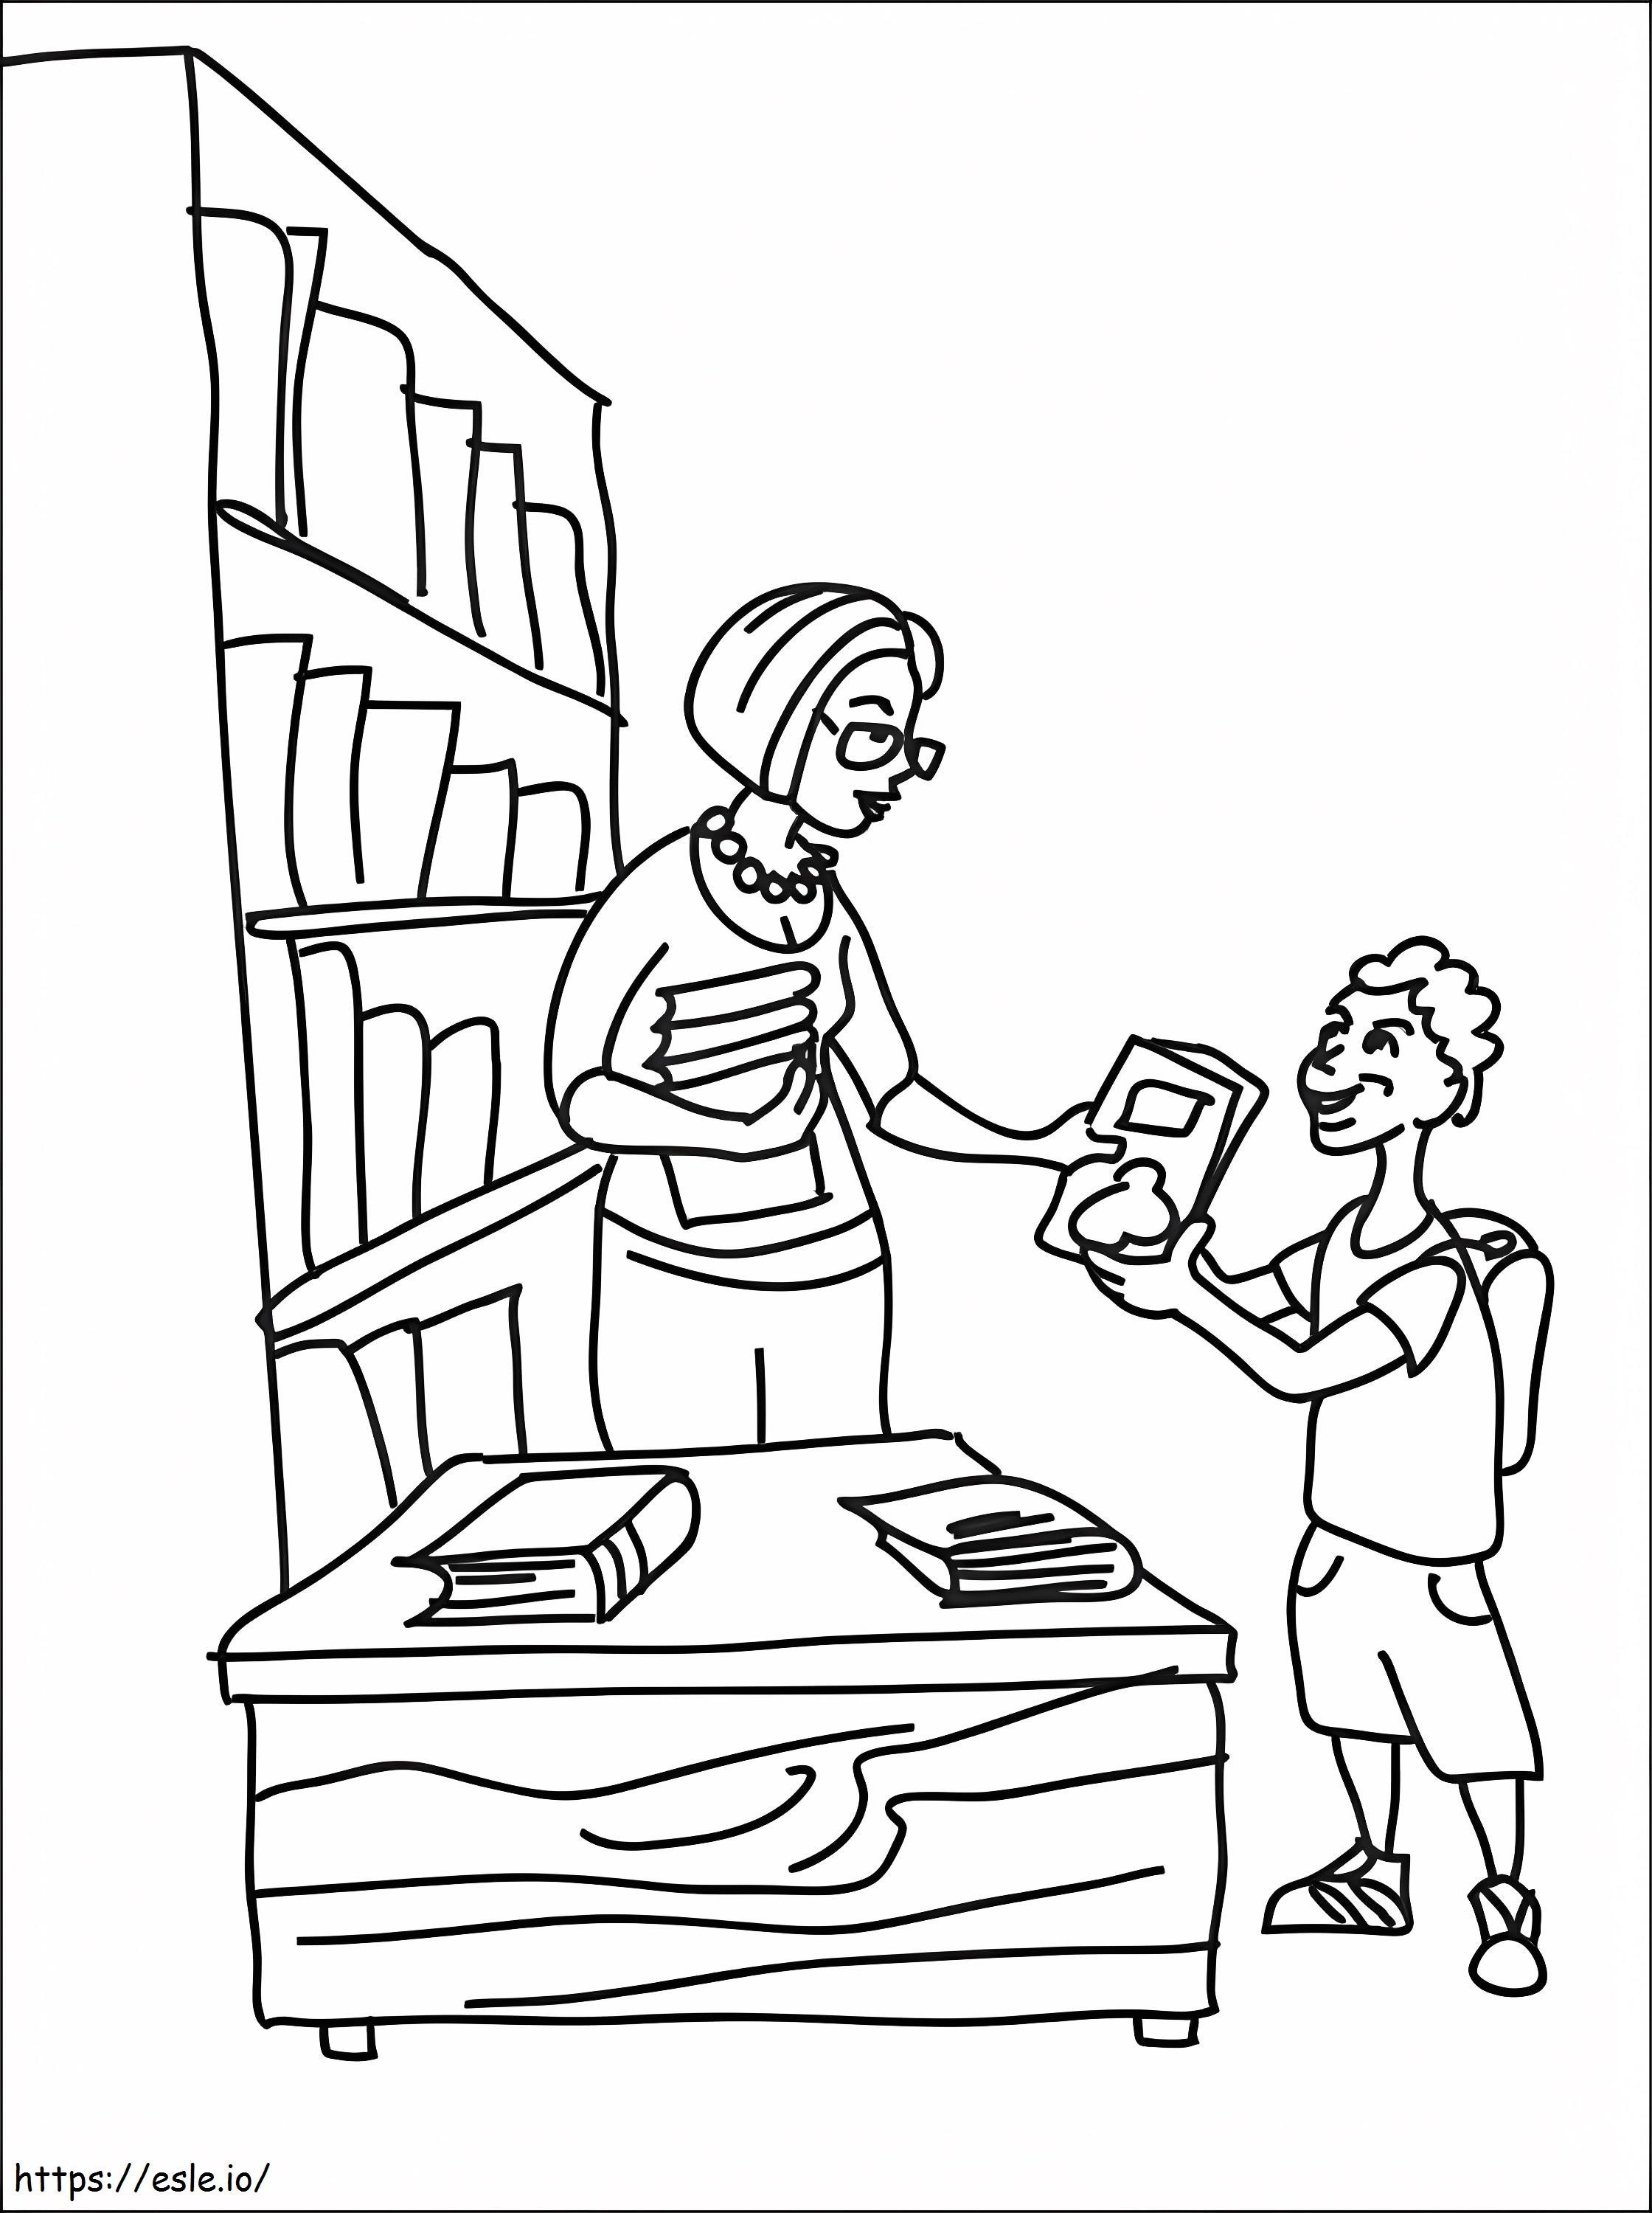 Librarian And Boy coloring page